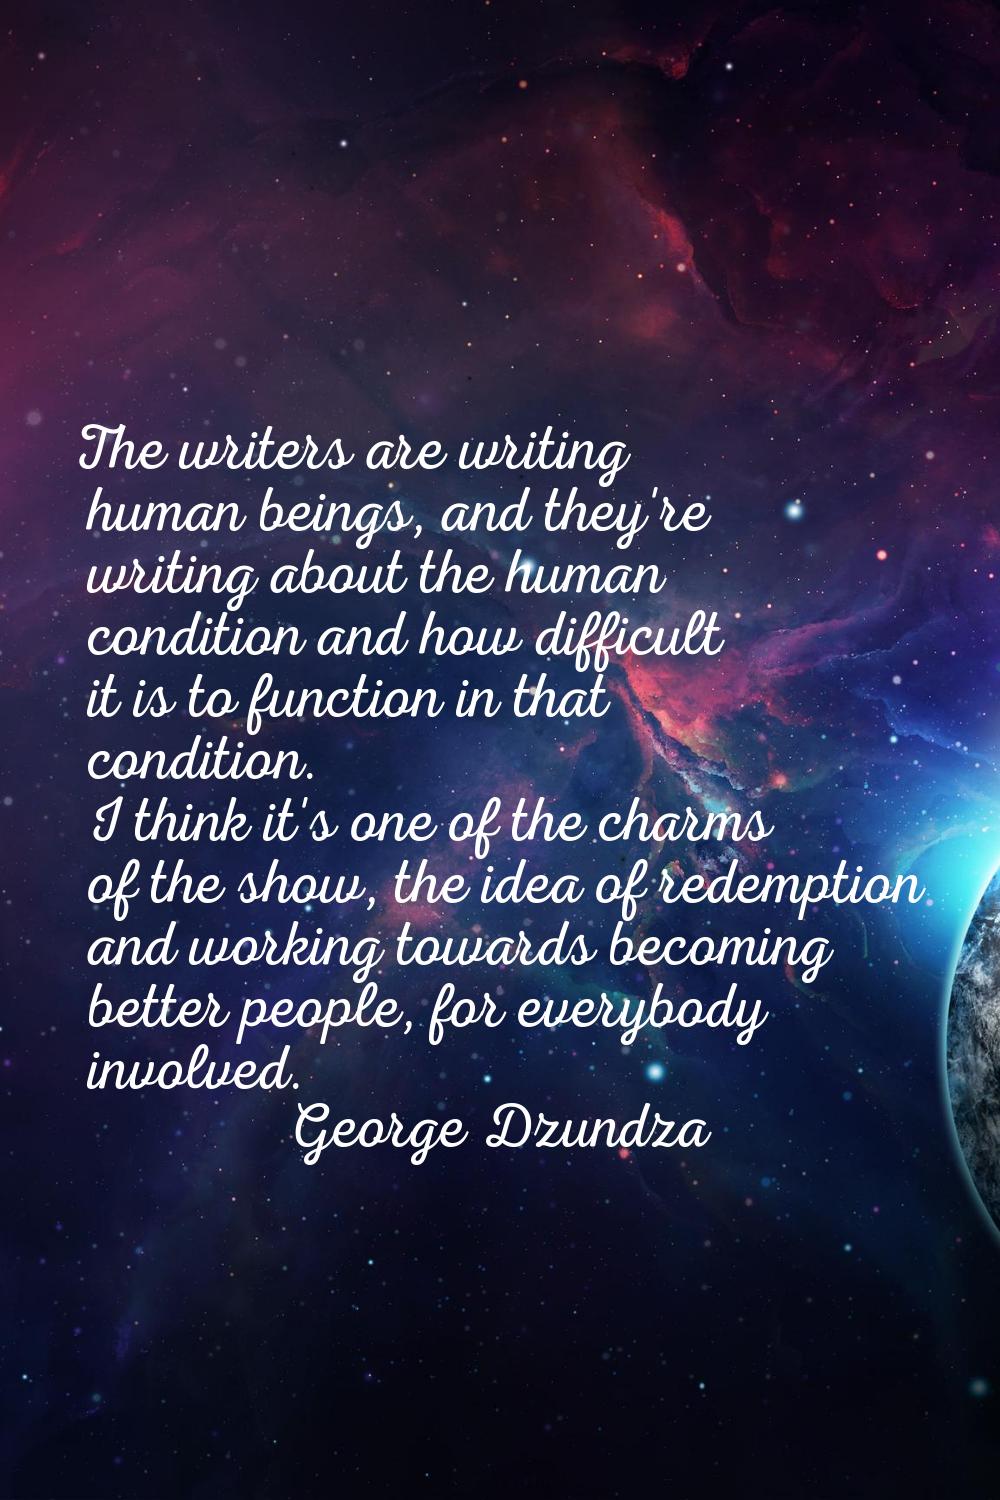 The writers are writing human beings, and they're writing about the human condition and how difficu